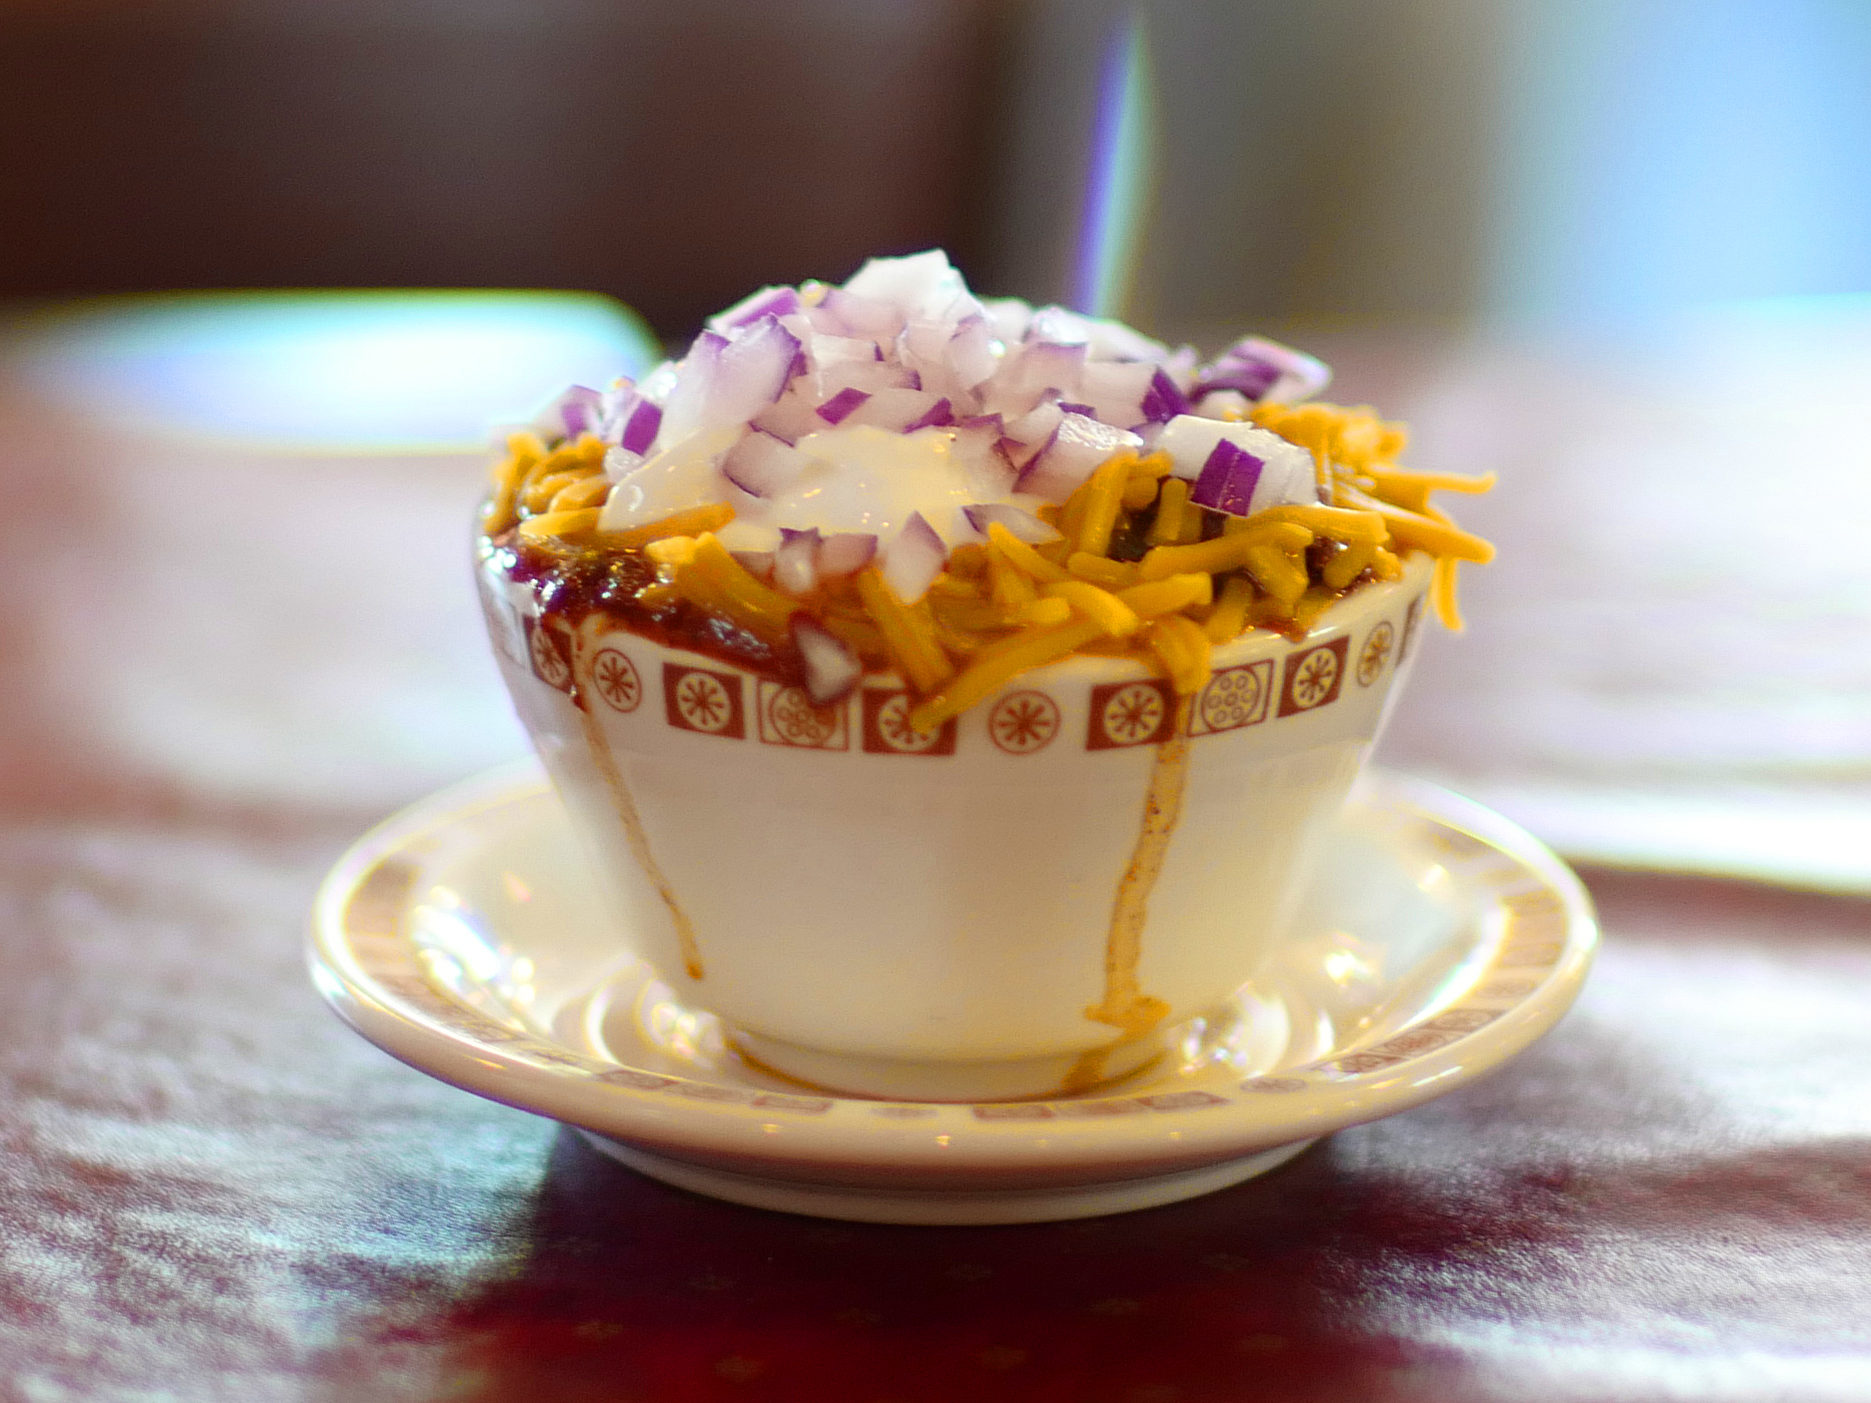 Cup of chili topped with cheese and chopped raw onions